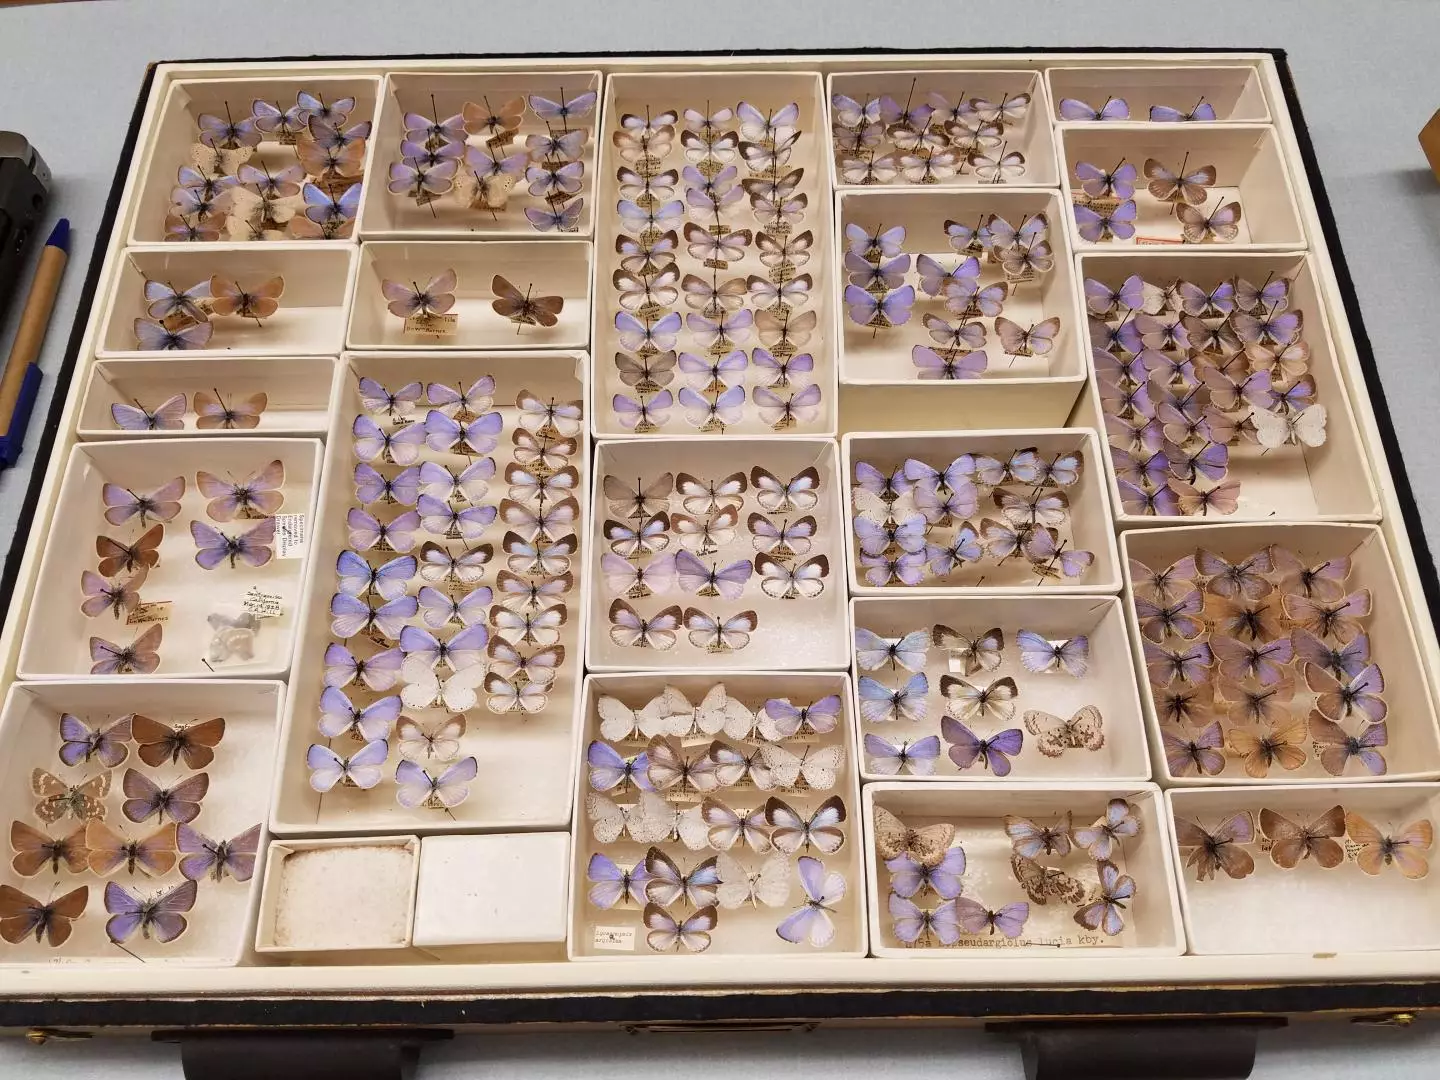 Luckily, Chicago's Field Museum has an extensive collection of Xerces blue butterflies.